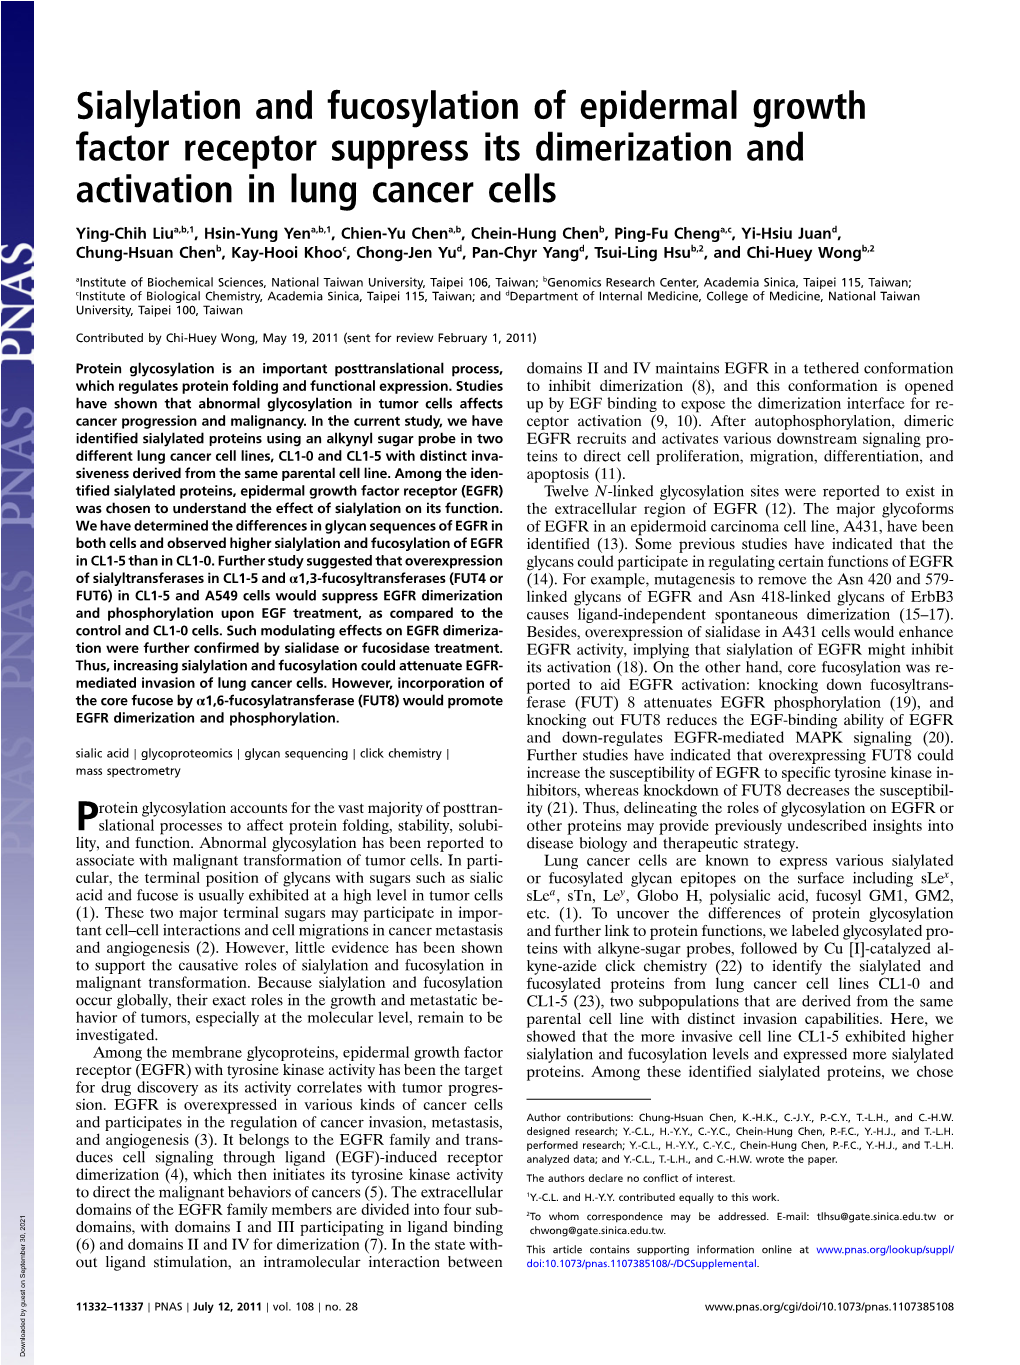 Sialylation and Fucosylation of Epidermal Growth Factor Receptor Suppress Its Dimerization and Activation in Lung Cancer Cells